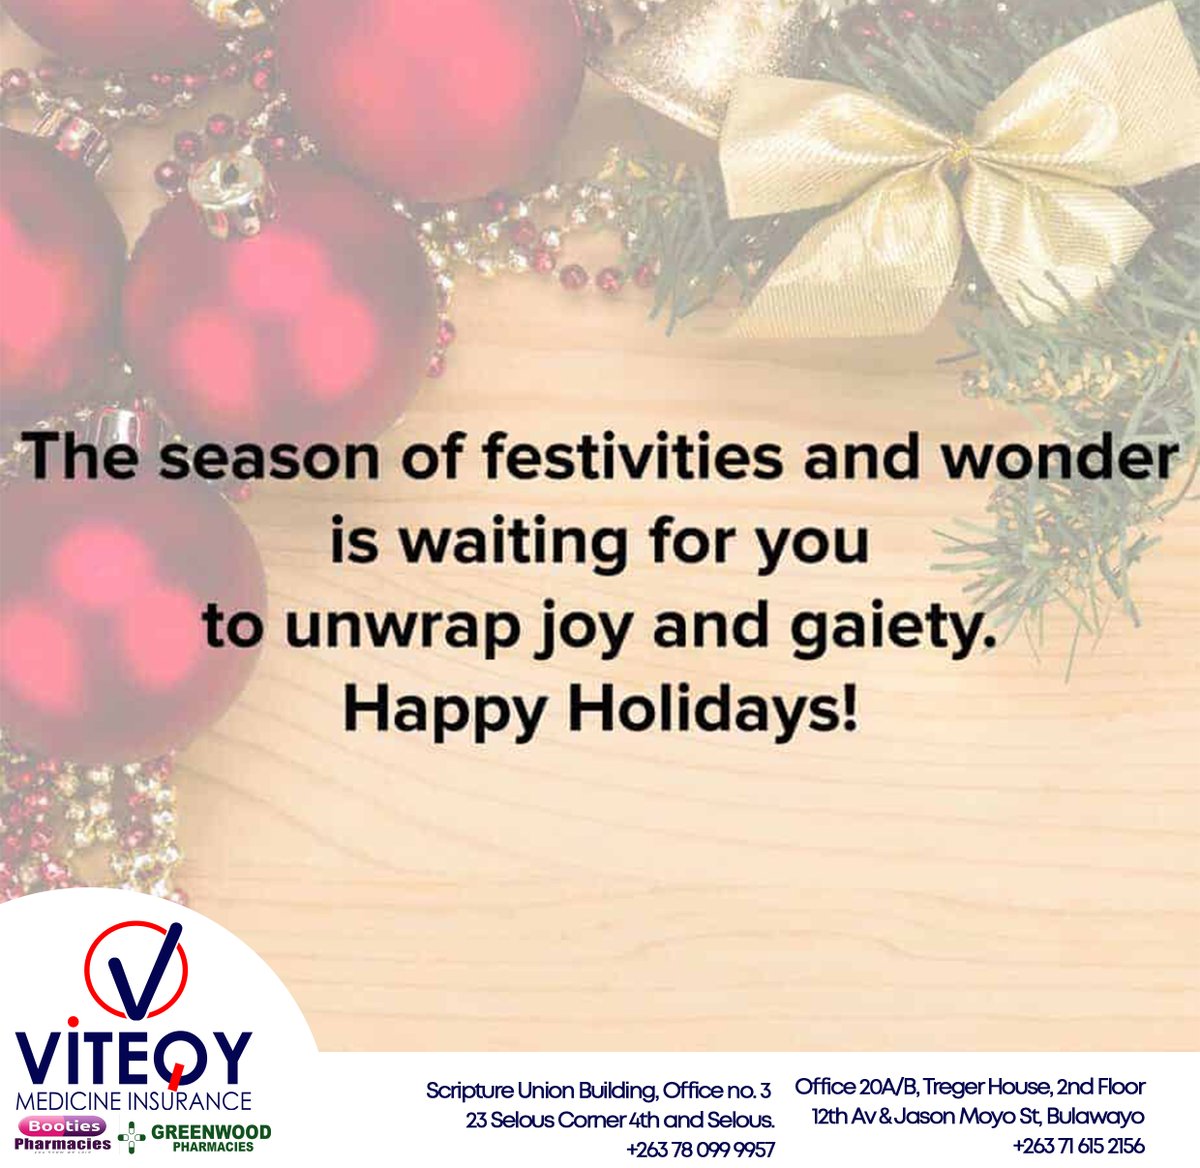 HAPPY HOLIDAYS!!
#doctors #consultation #dental #optical #viteqy #NoShortfalls #NoAgeLimits #medicineinsurance #acutemedication #ChronicMedication #pharmacy #zimdiaspora
GET IN TOUCH FOR MORE INFORMATION & AVAILABLE PACKAGES
+263780999957 | +263716152156. 
viteqy.com